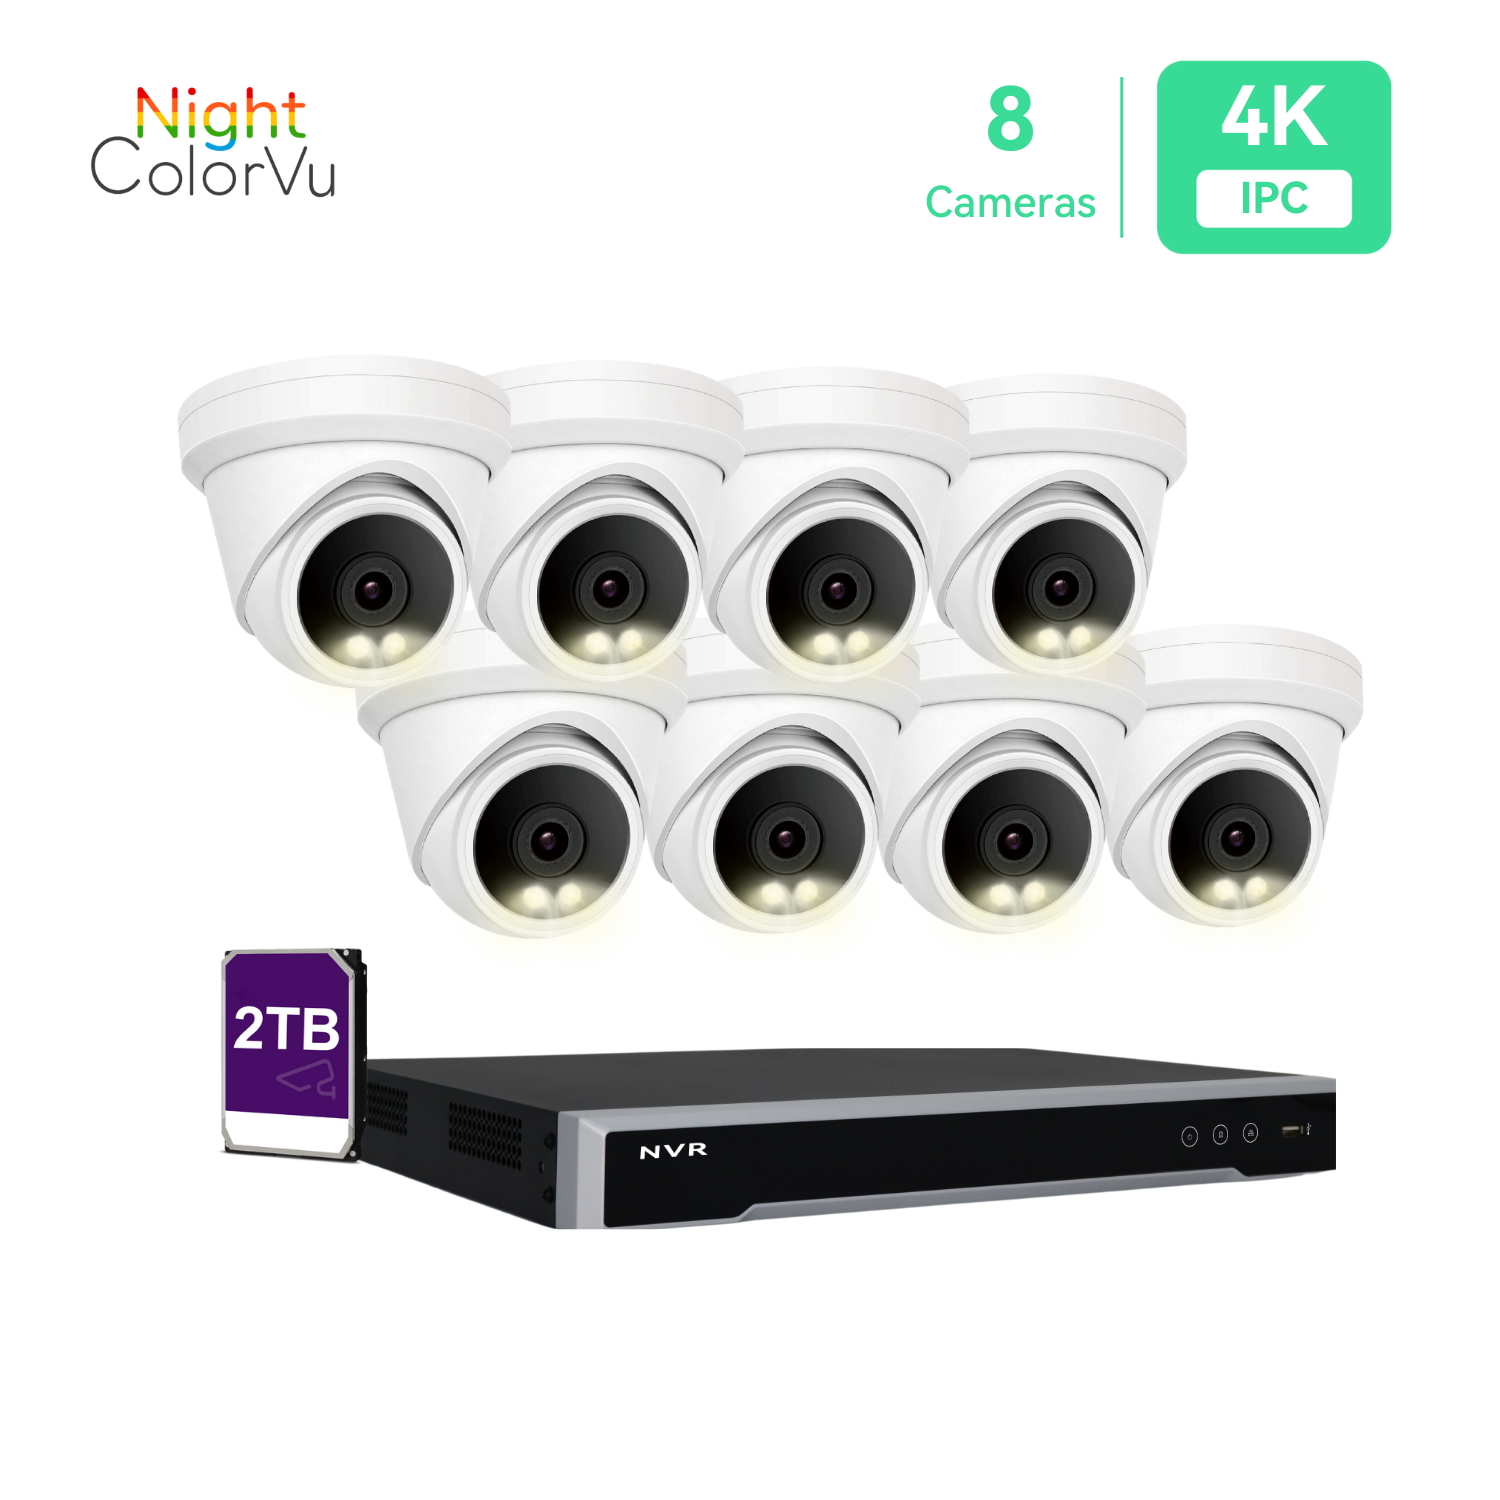 8 Channel 8MP PoE IP Camera System 8CH 4K NVR and 8 Pcs 8MP Night ColorVu PoE Turret Security Cameras with 2TB HDD